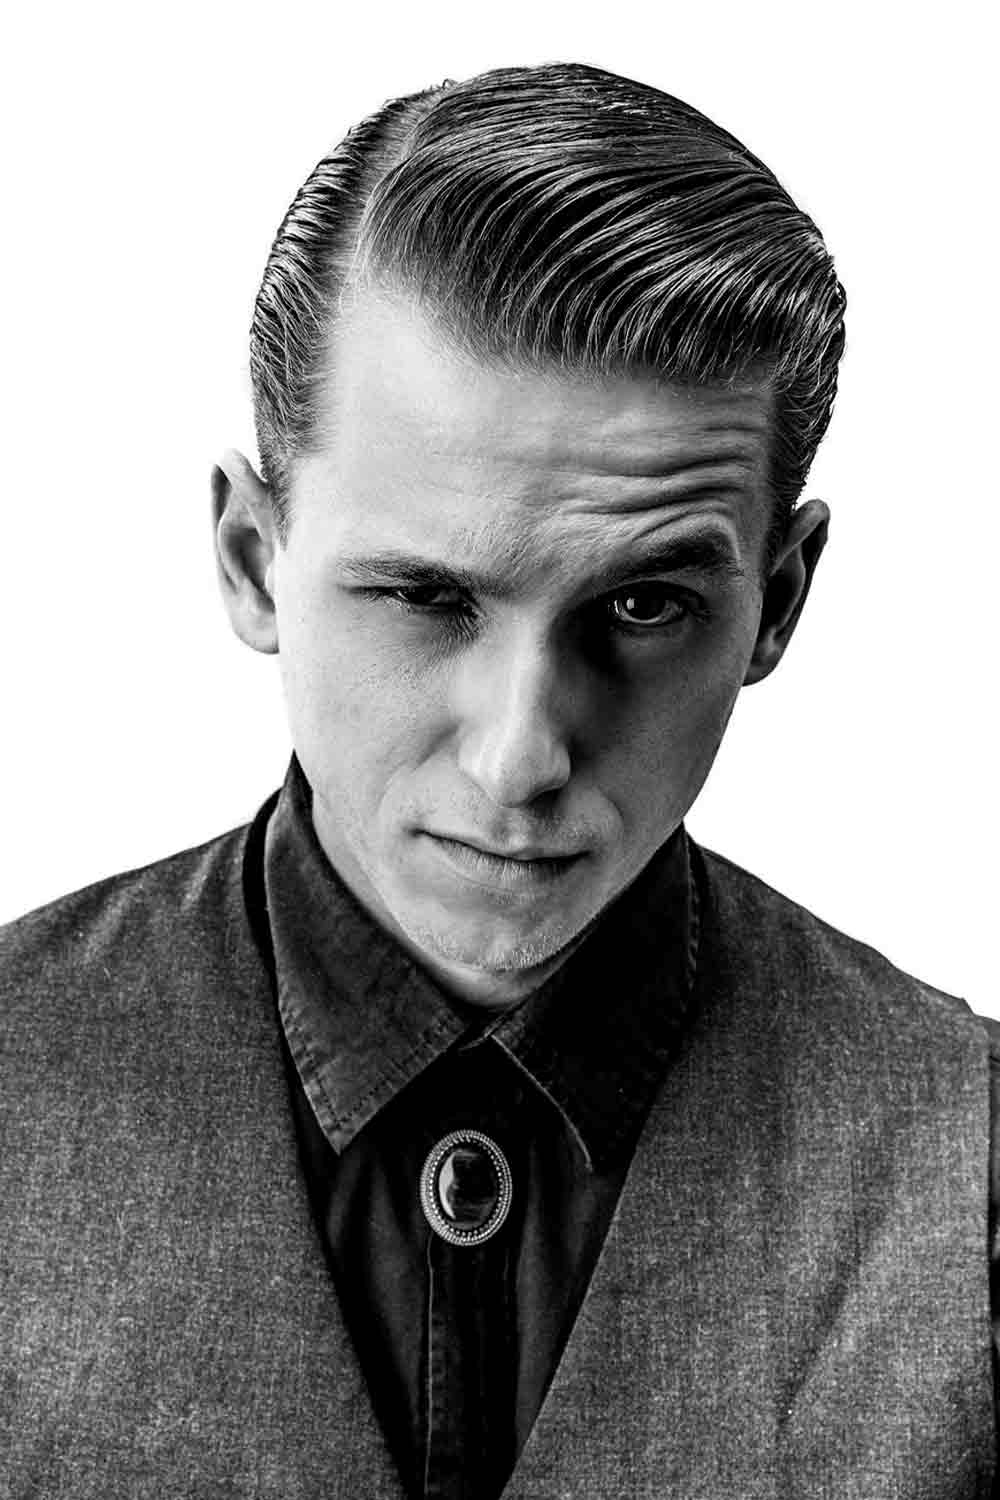 Side Part Slick Back #promhairstyles #promhairstylesformen #formalhairstyles #mensformalhairstyles